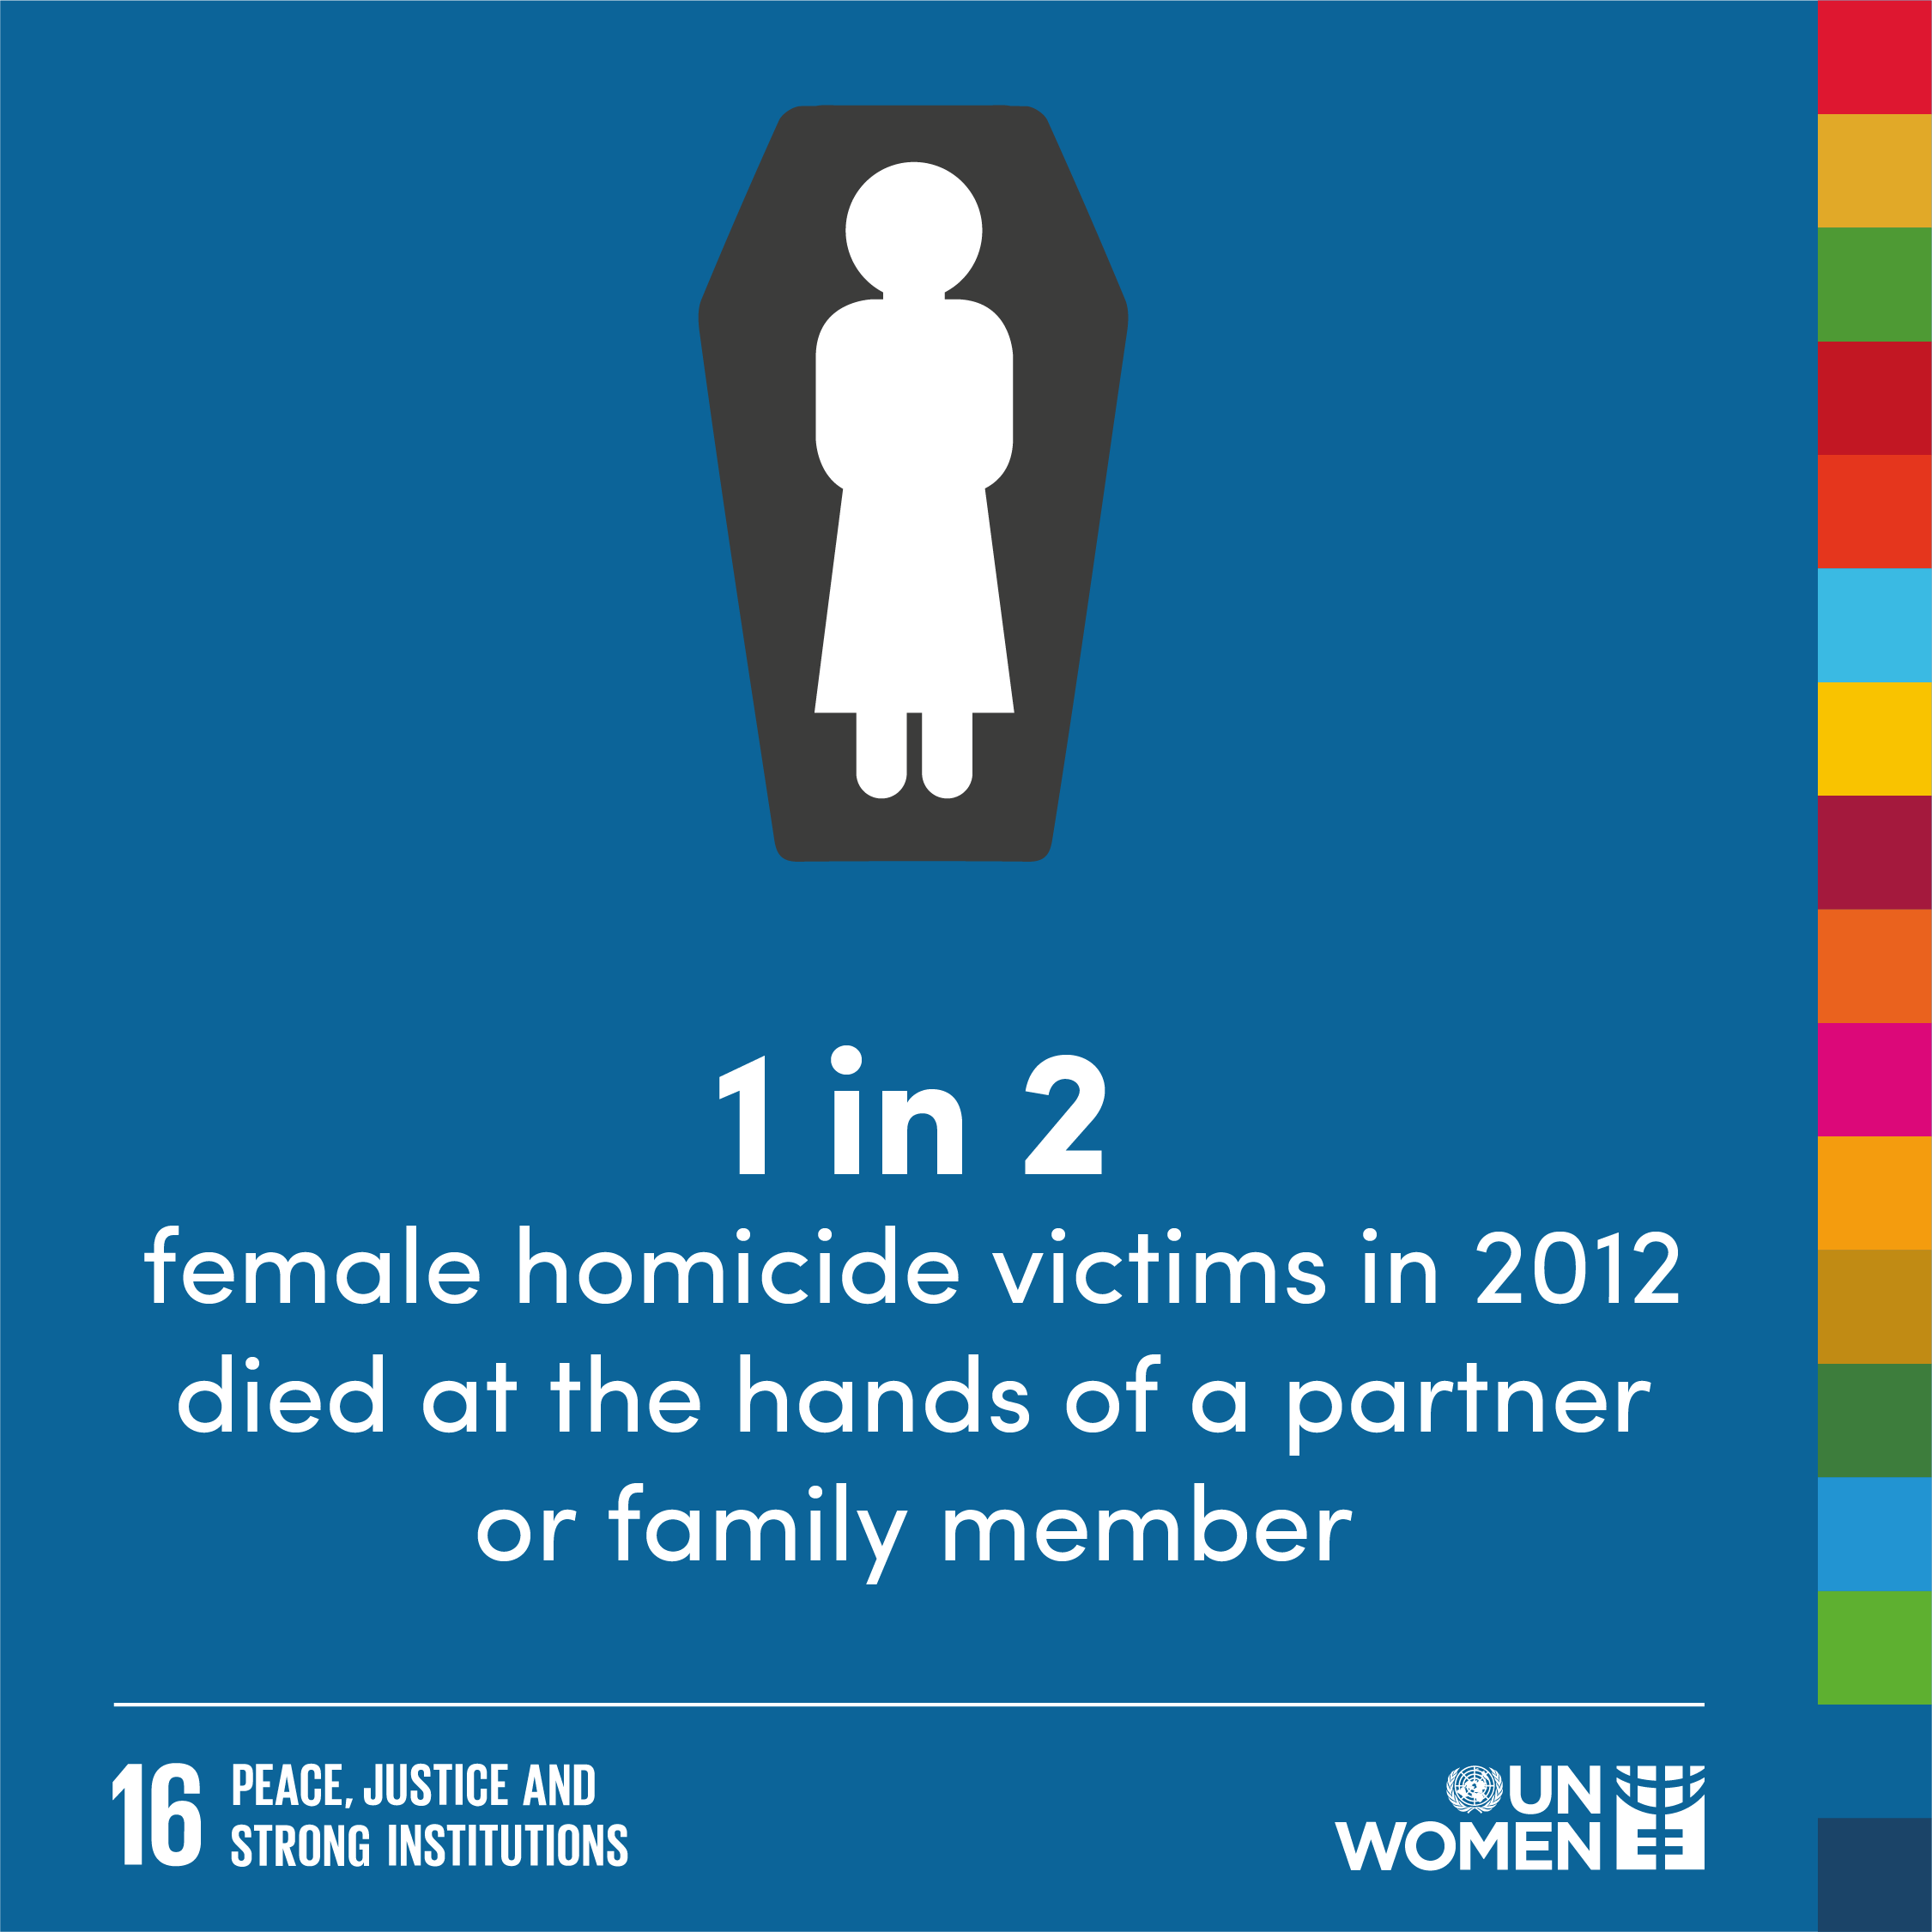 1 in 2 female homicide victims in 2012 died at the hands of a partner or family member. 